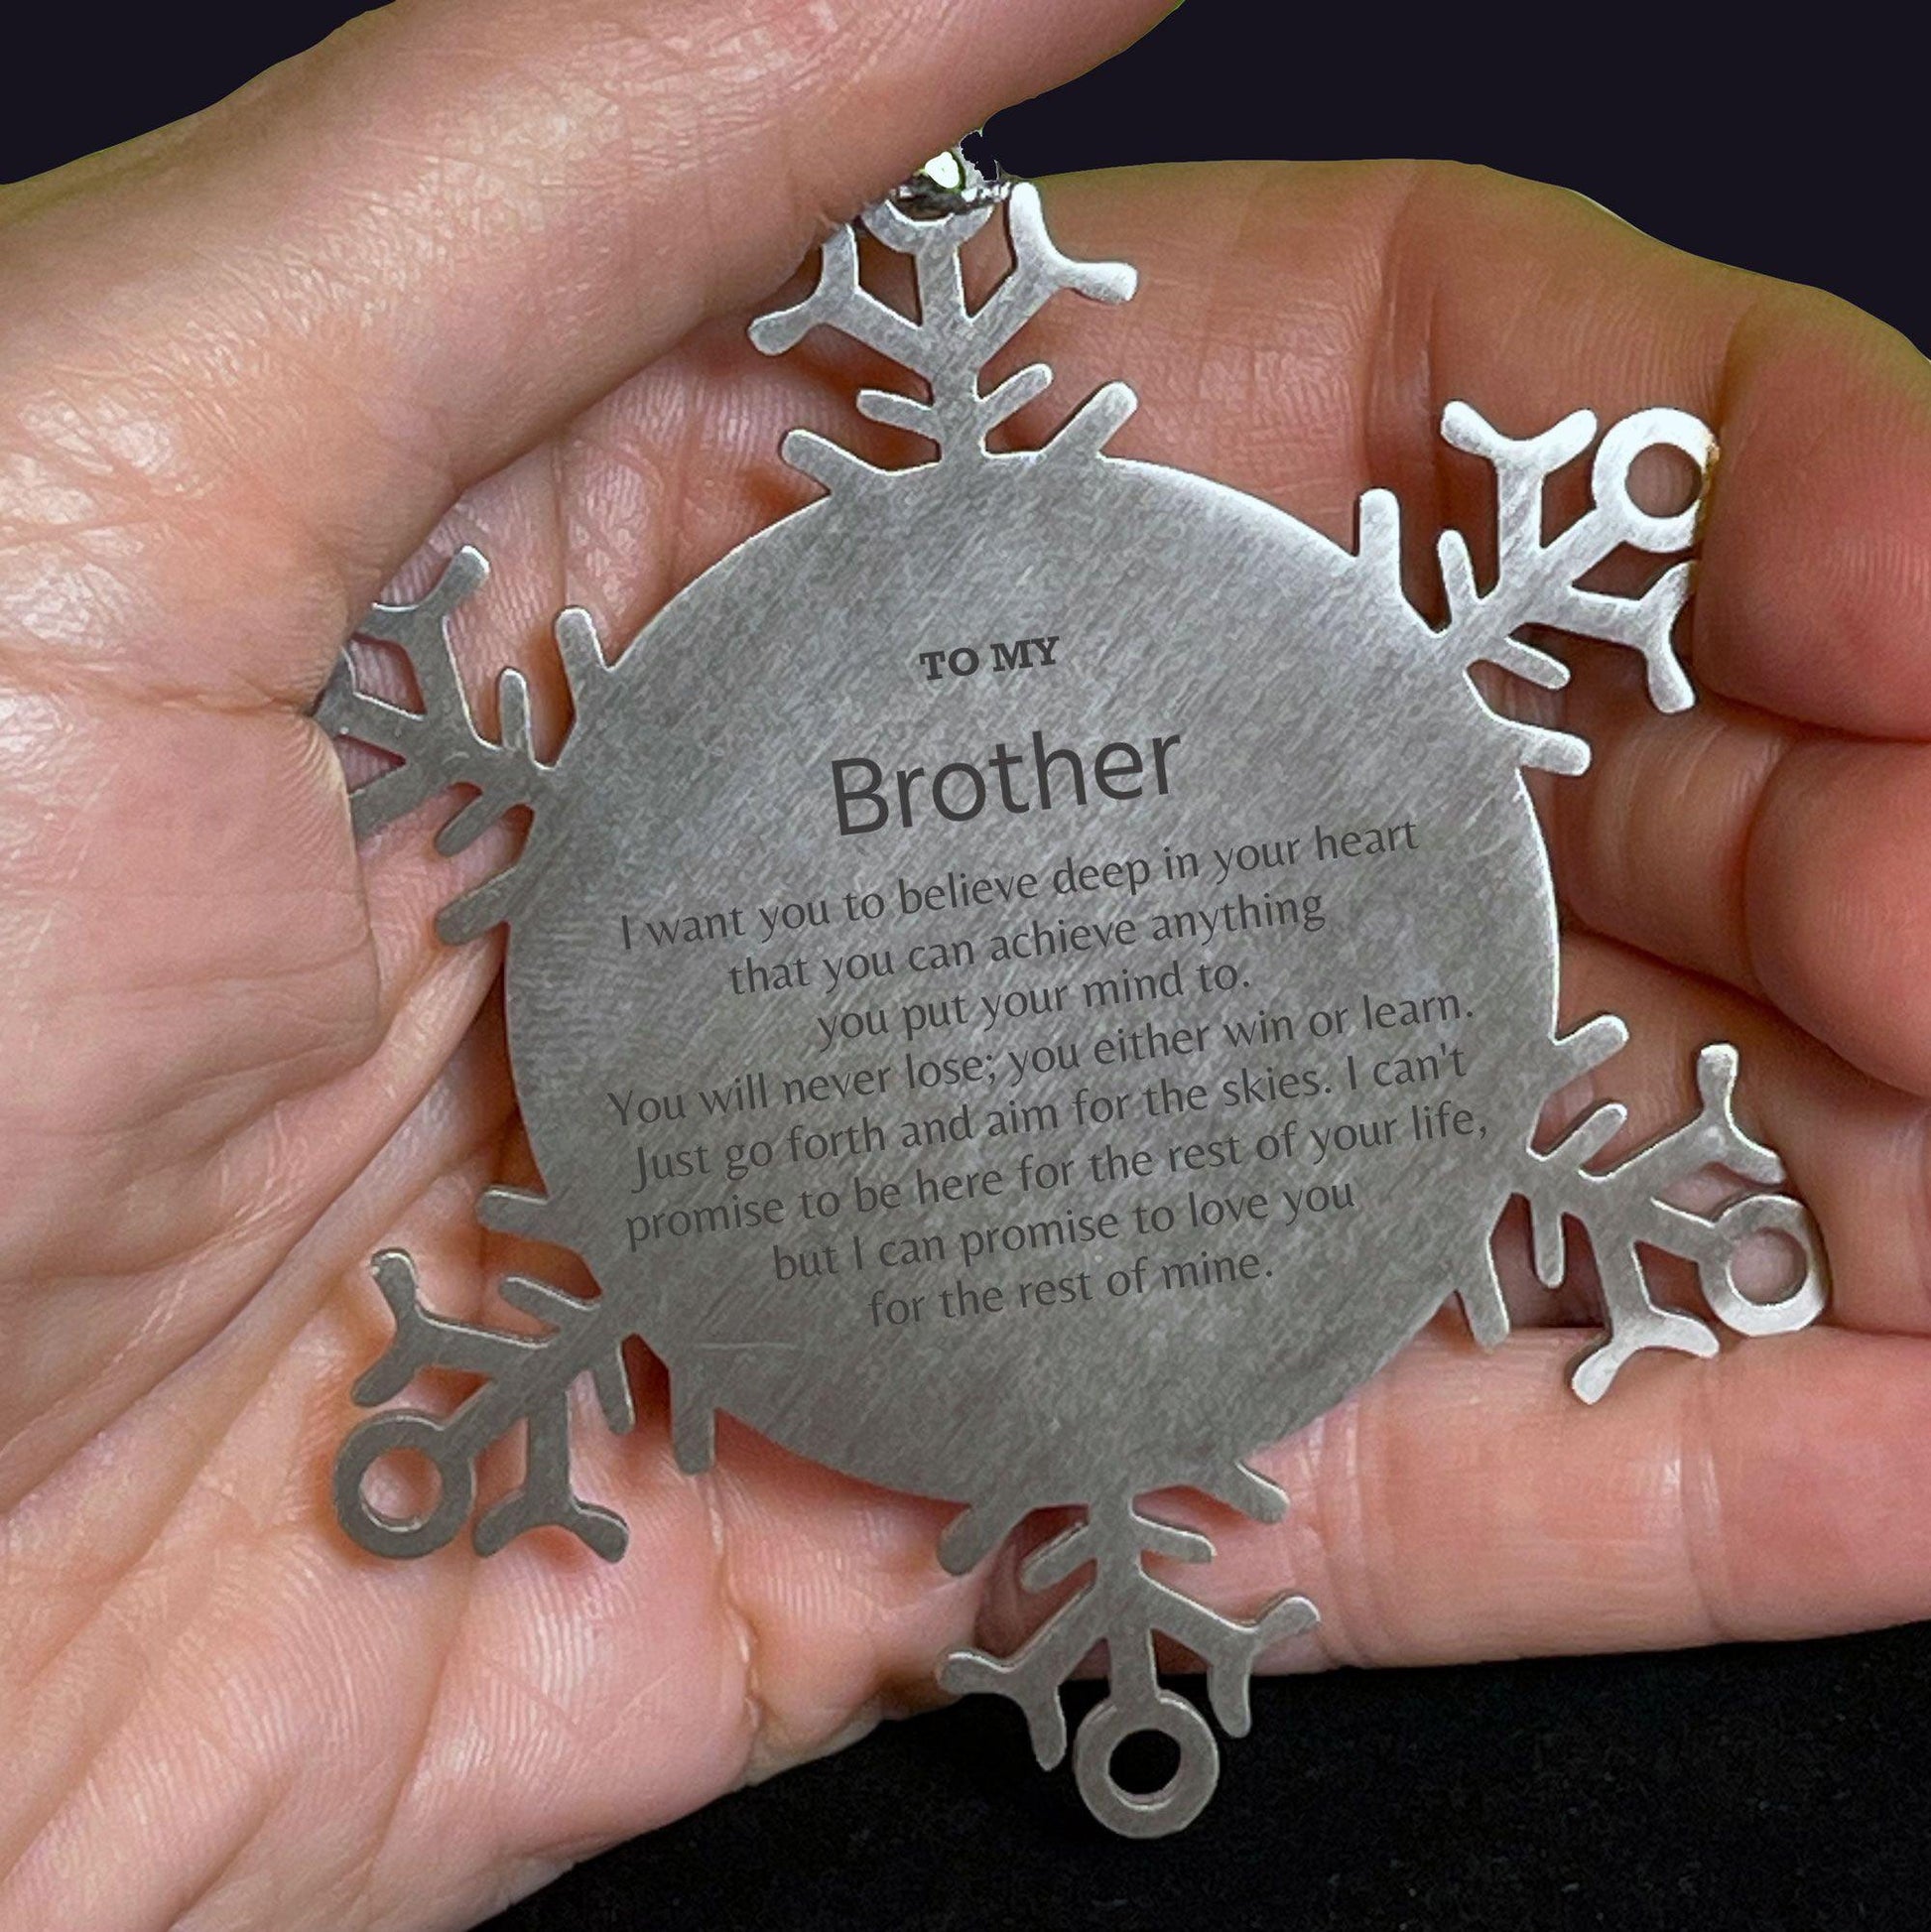 Motivational Brother Snowflake Ornament, Brother I can promise to love you for the rest of mine, Christmas Ornament For Brother, Brother Gift for Women Men - Mallard Moon Gift Shop